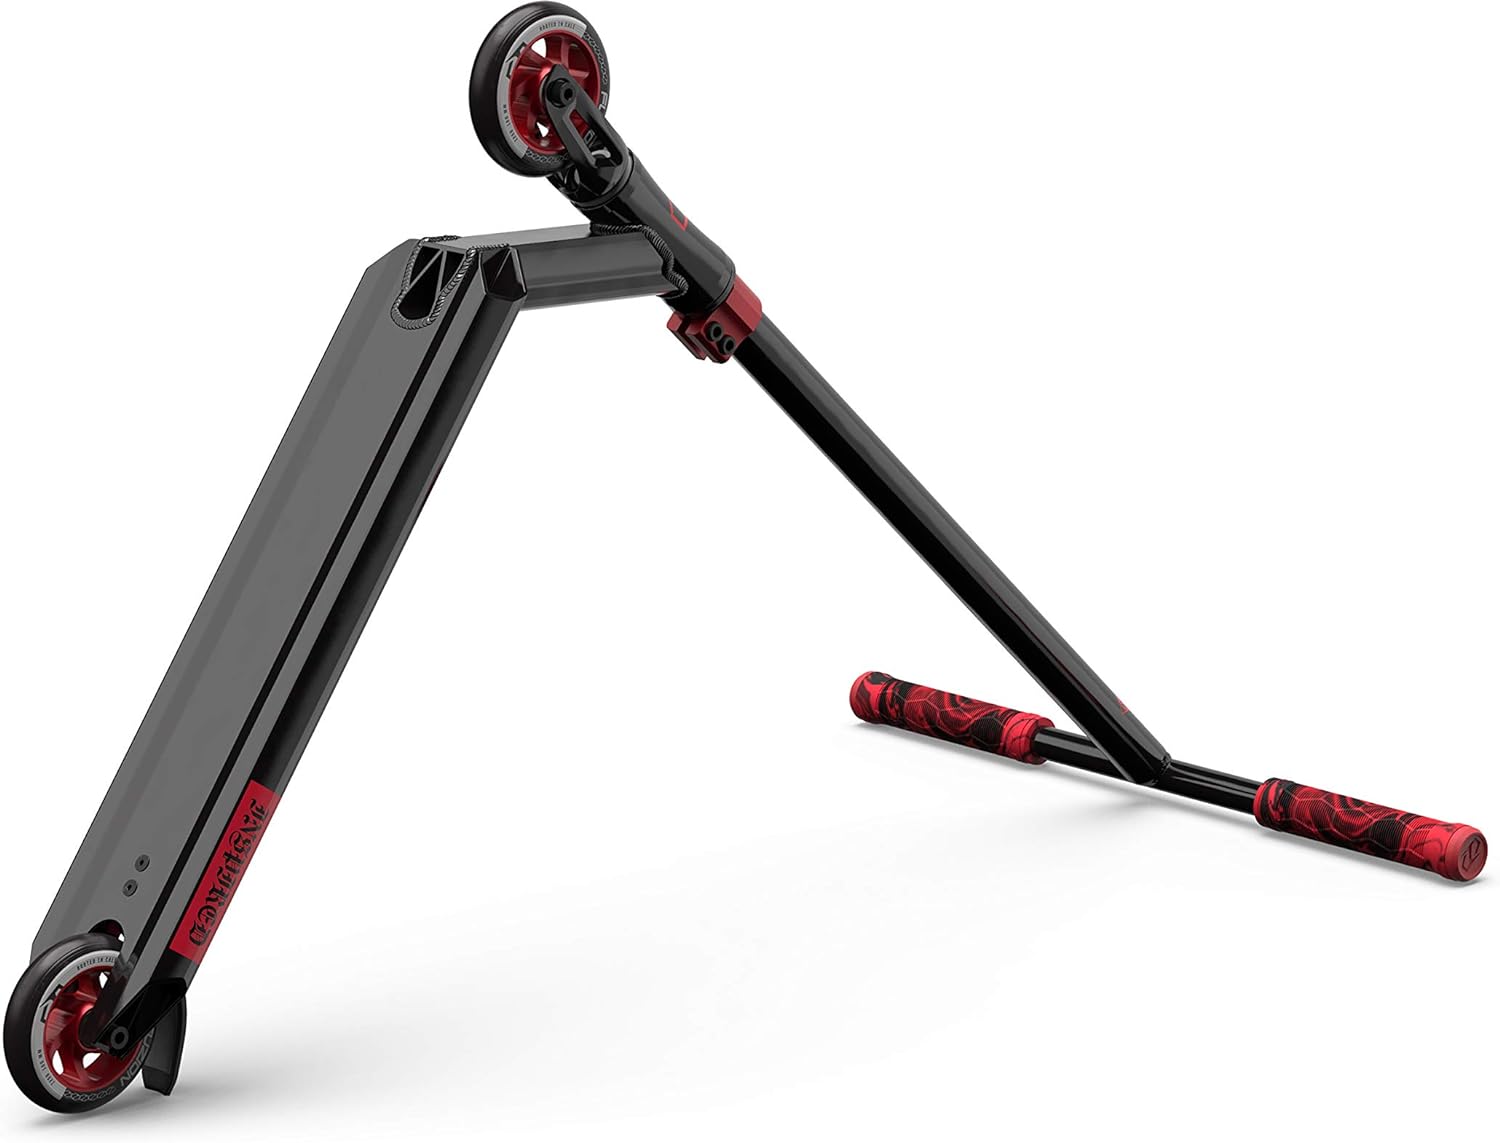 Fuzion Z250 SE Pro Scooters - The Ultimate Trick Scooter for Kids and Adults